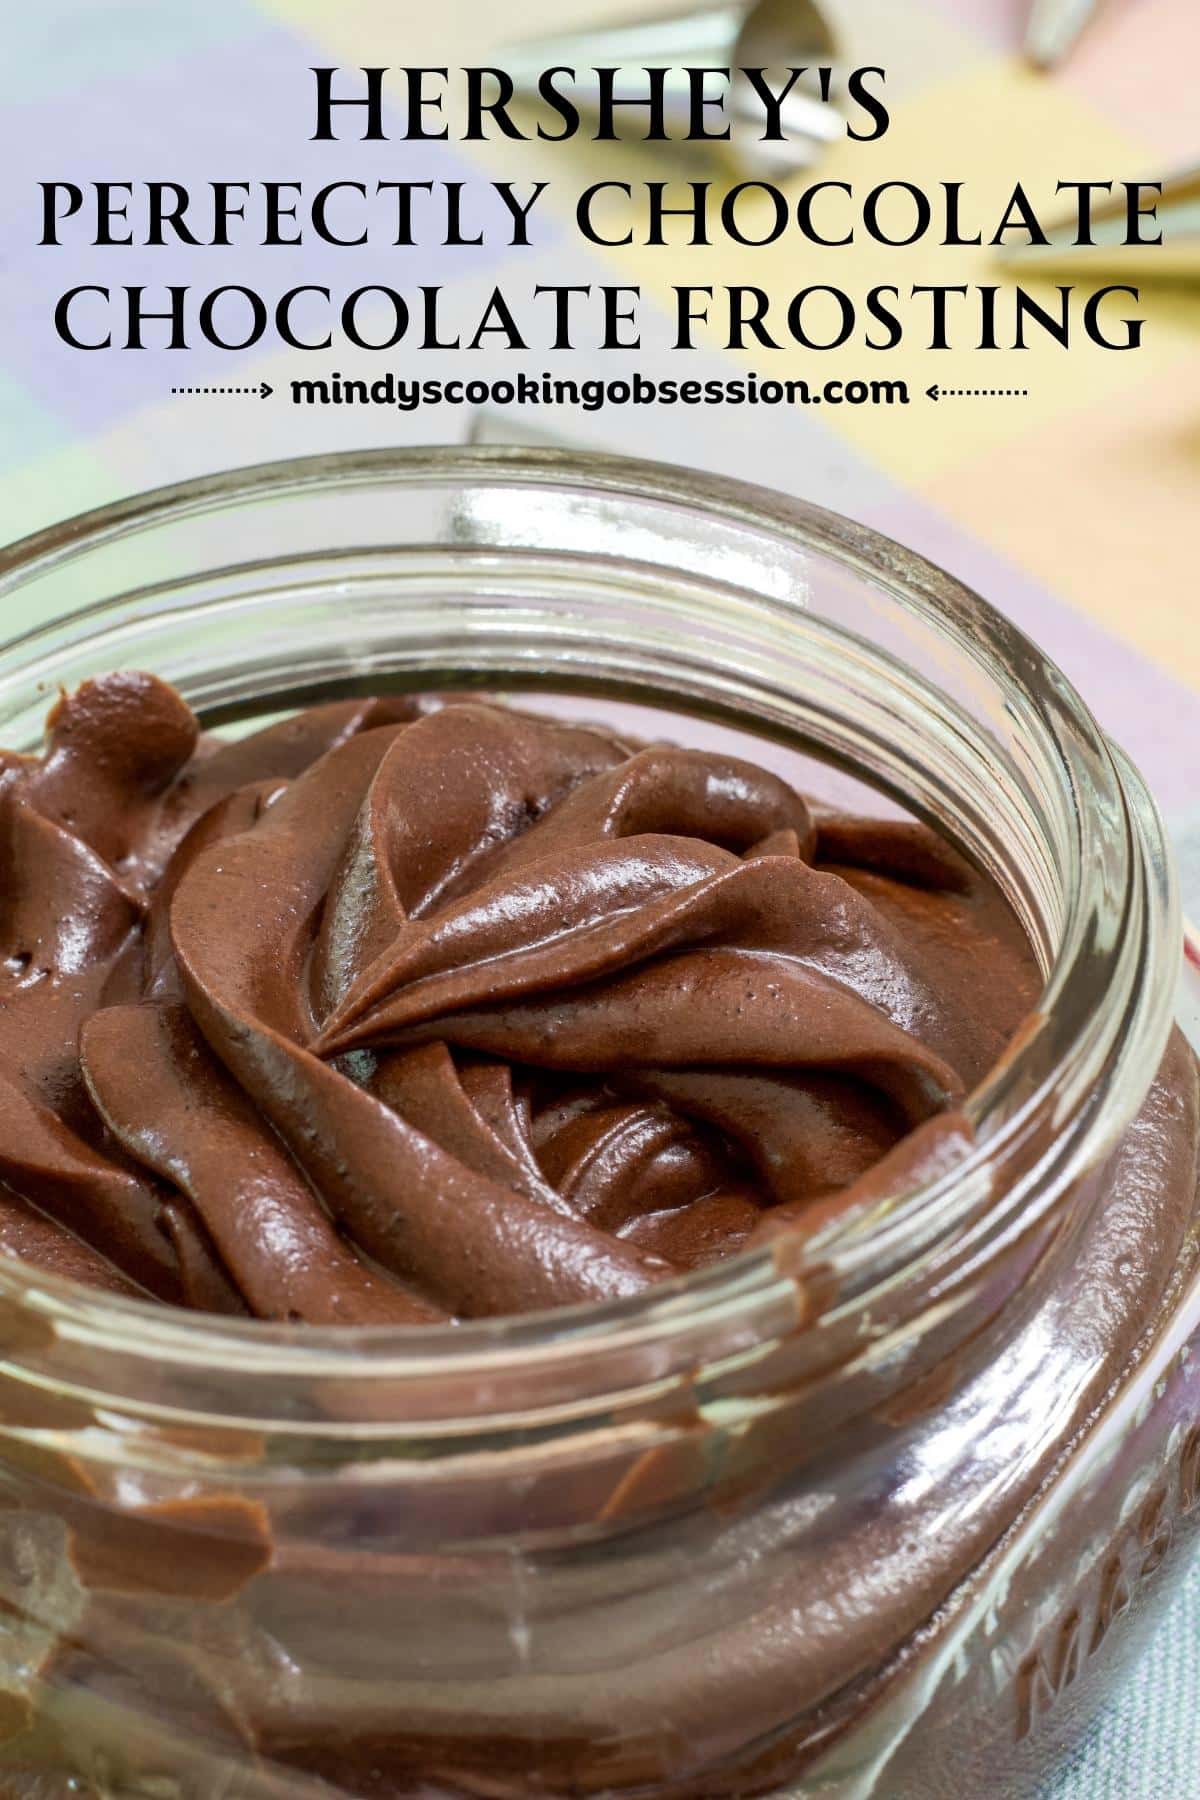 https://www.mindyscookingobsession.com/wp-content/uploads/2023/06/Easy-Hersheys-Perfectly-Chocolate-Frosting-Recipe-1.jpg